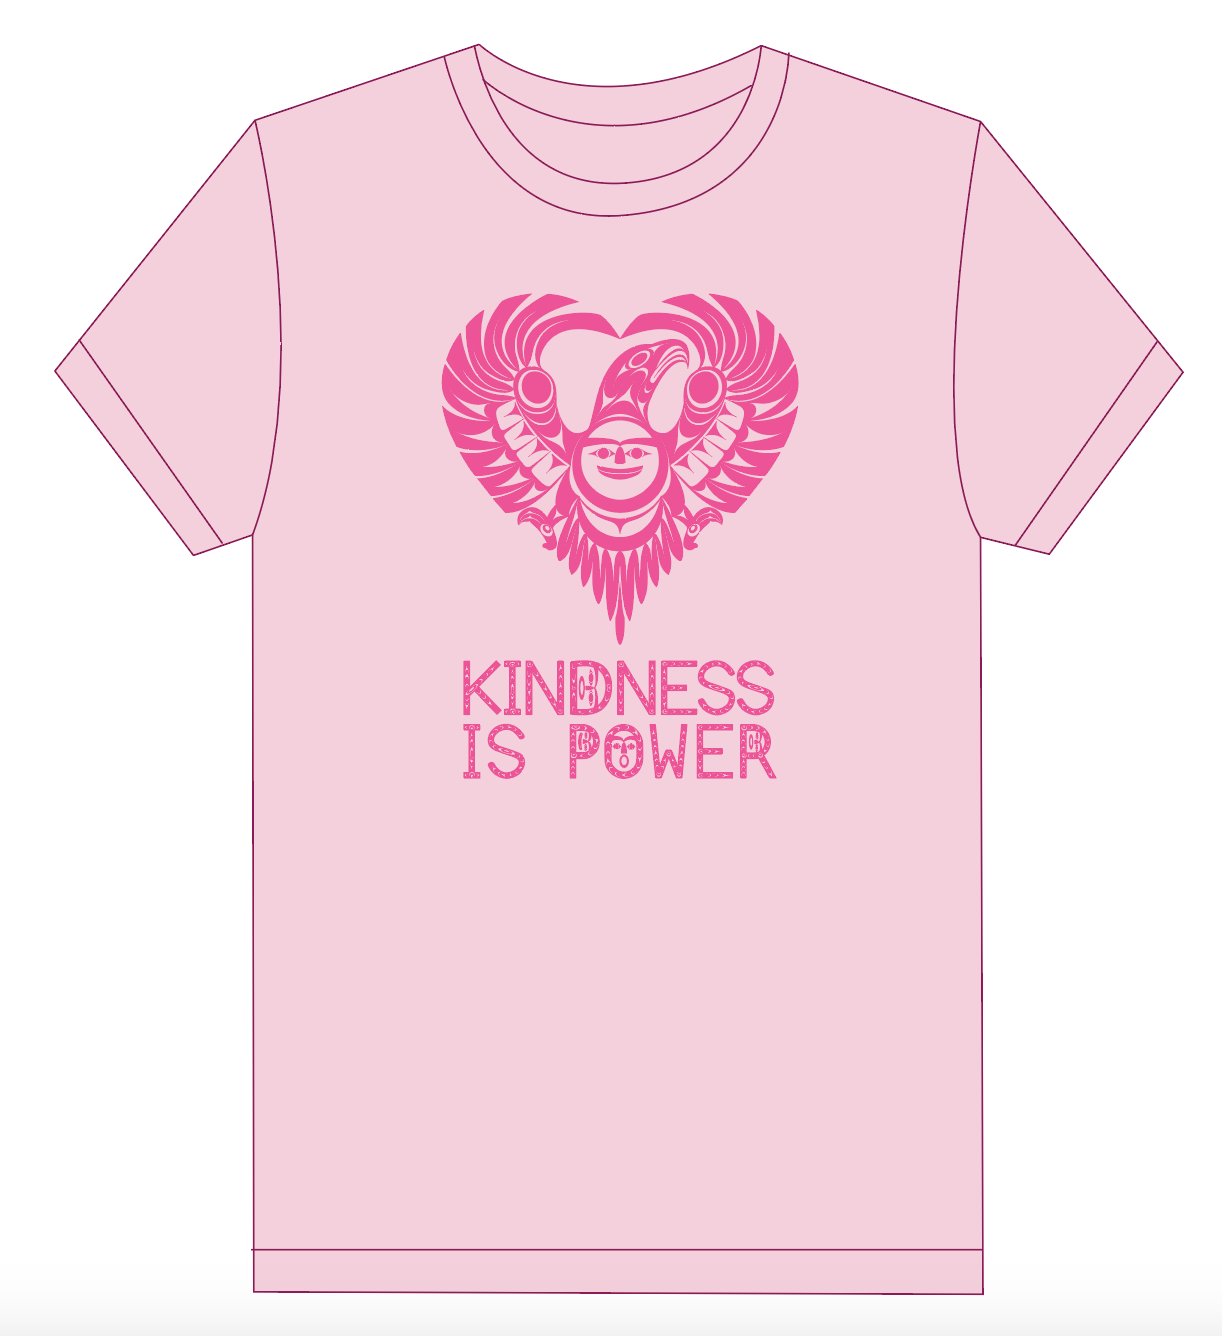 2022 Kindness is Power - Pink Shirt by Francis Horne Sr. - Adult sizes-2